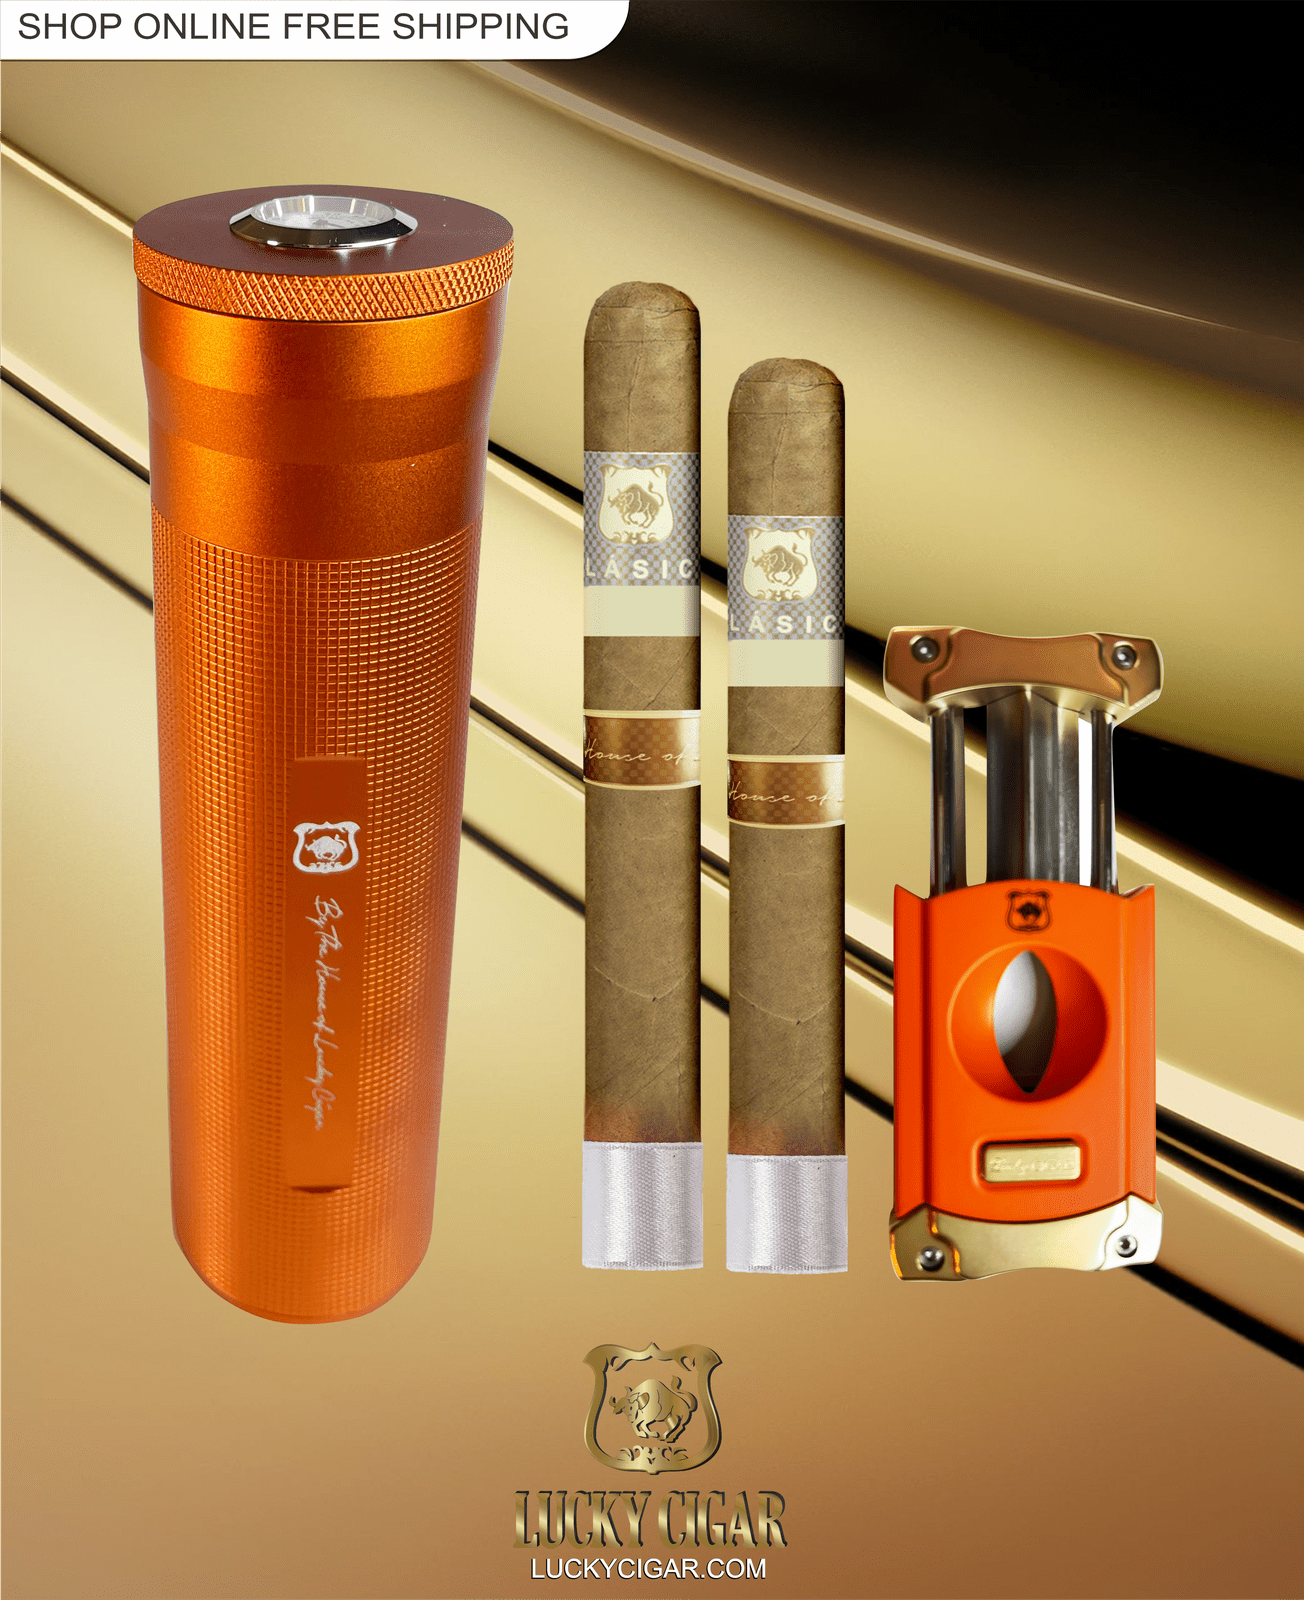 Lucky Cigar Sampler Sets: Set of 2 Classico Toro, Robusto Cigars with Cutter, Travel Humidor Tube with Hygrometer